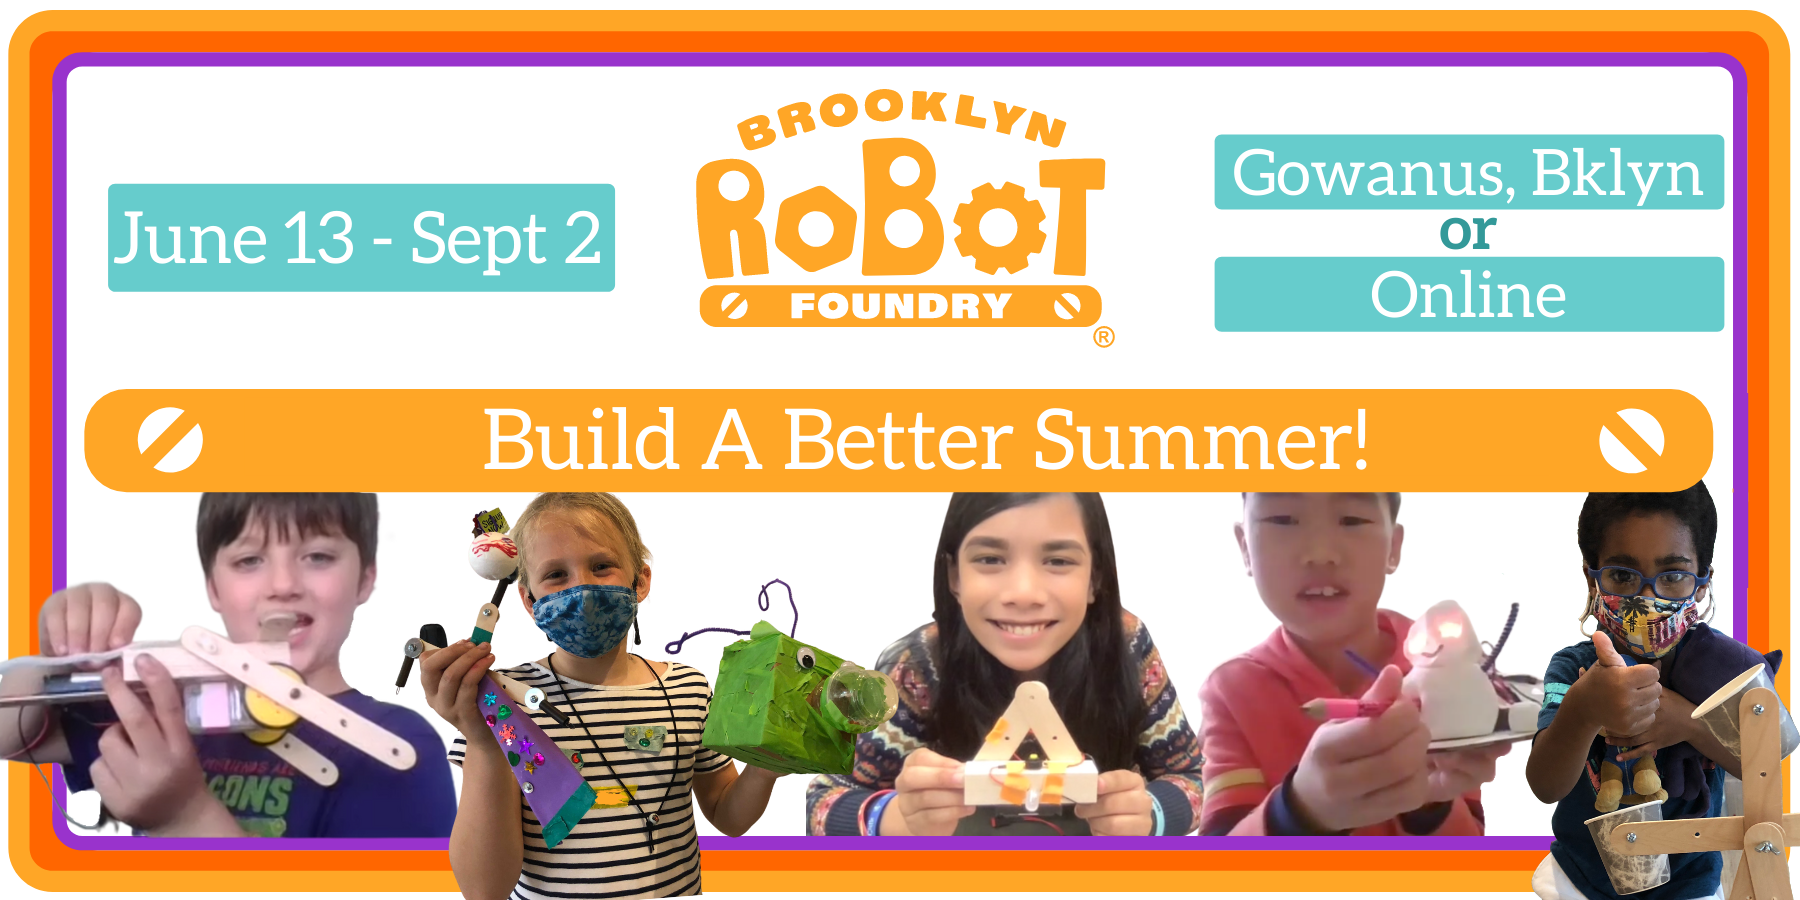 Build A Better Summer with Brooklyn Robot Foundry!